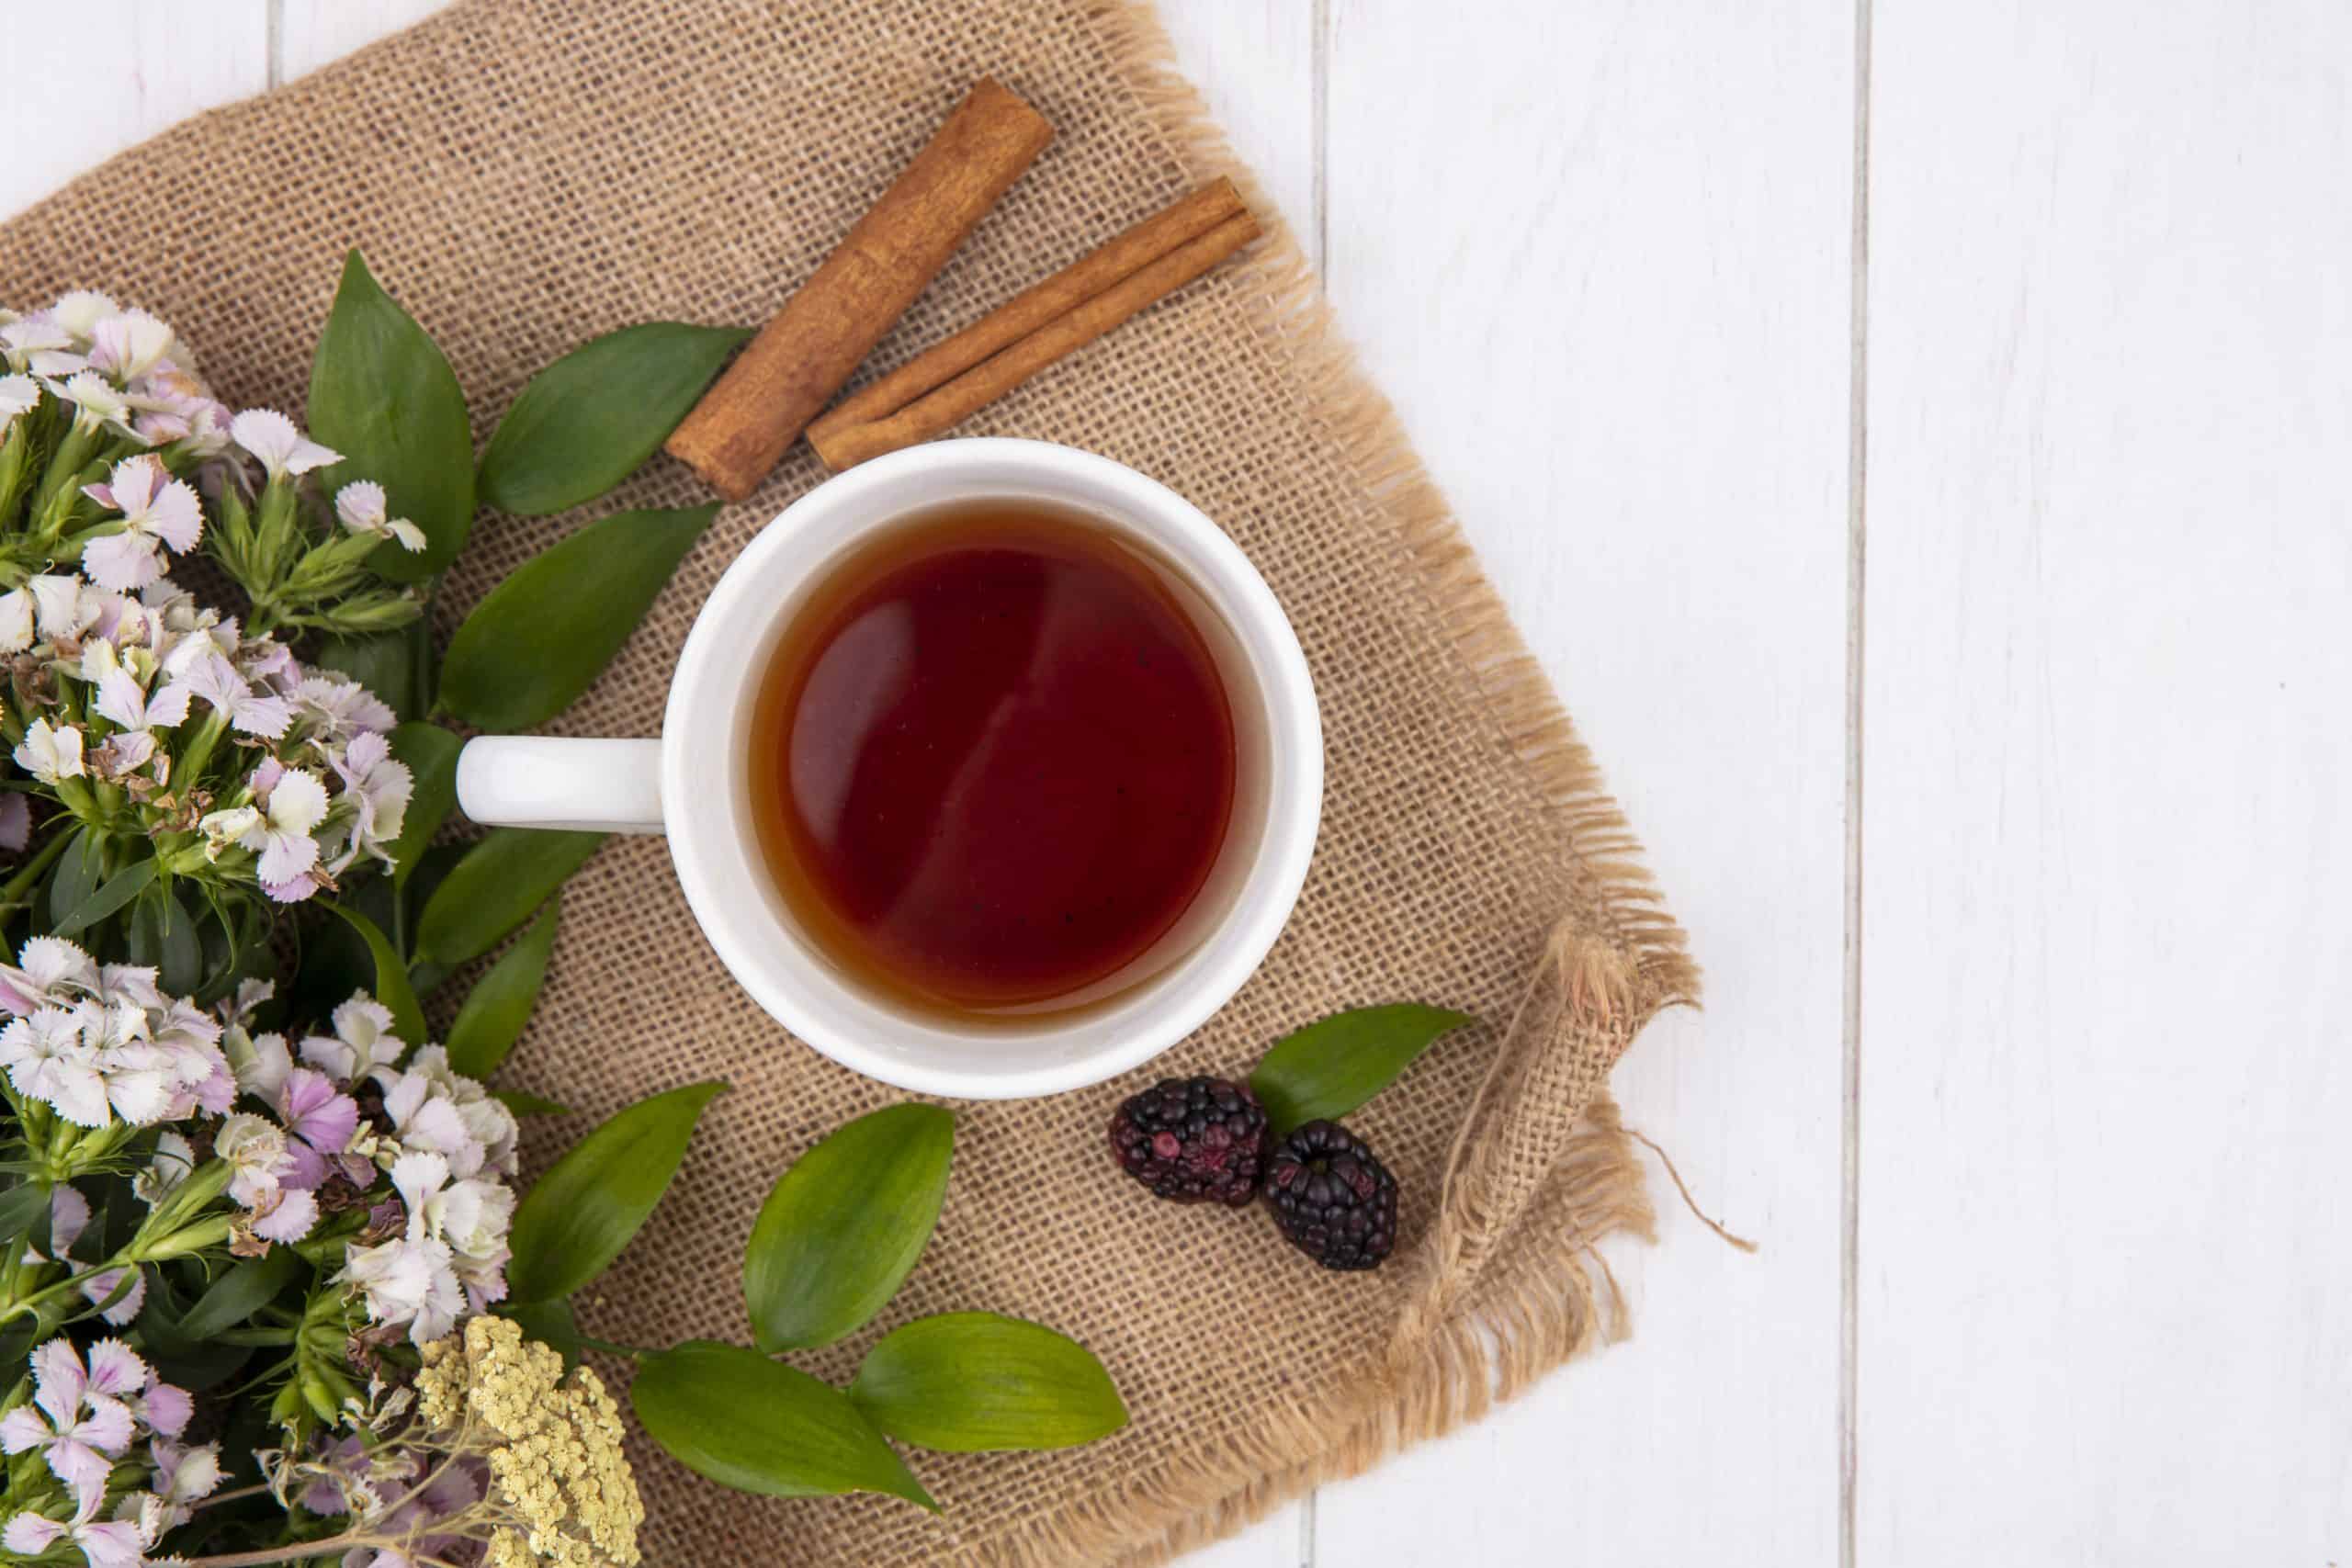 Slow Living - Enjoying Tea As A Part of a Slow Living Lifestyle